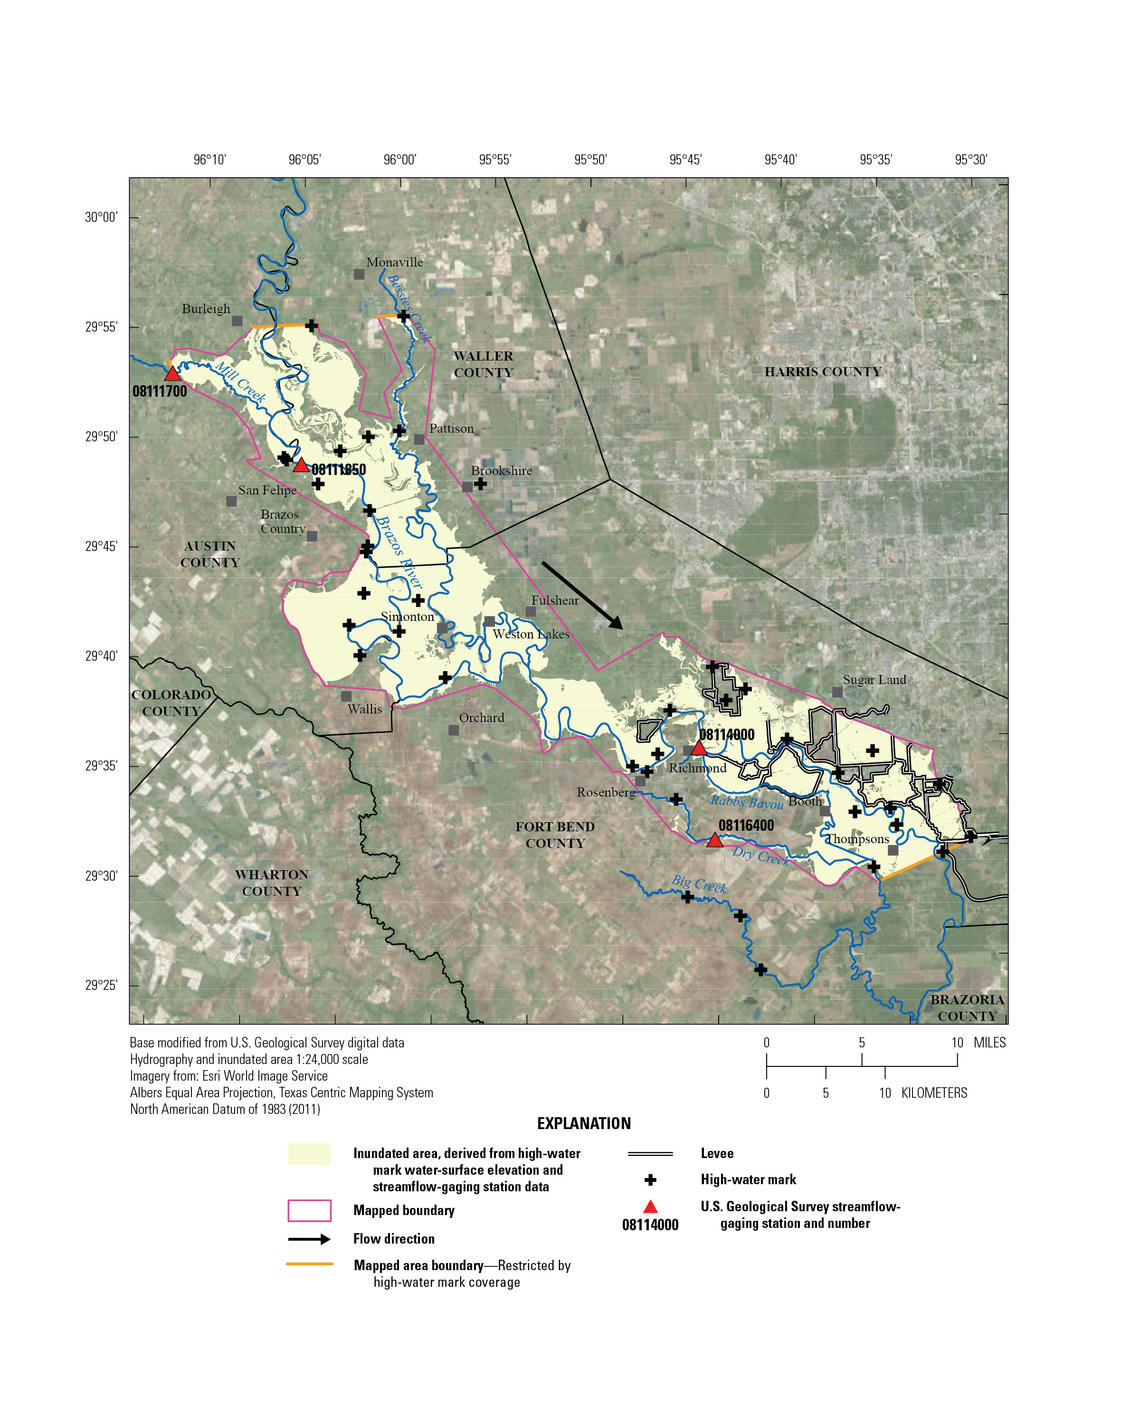 Hurricane Harvey flood-inundation map of the upper reach of the Brazos River